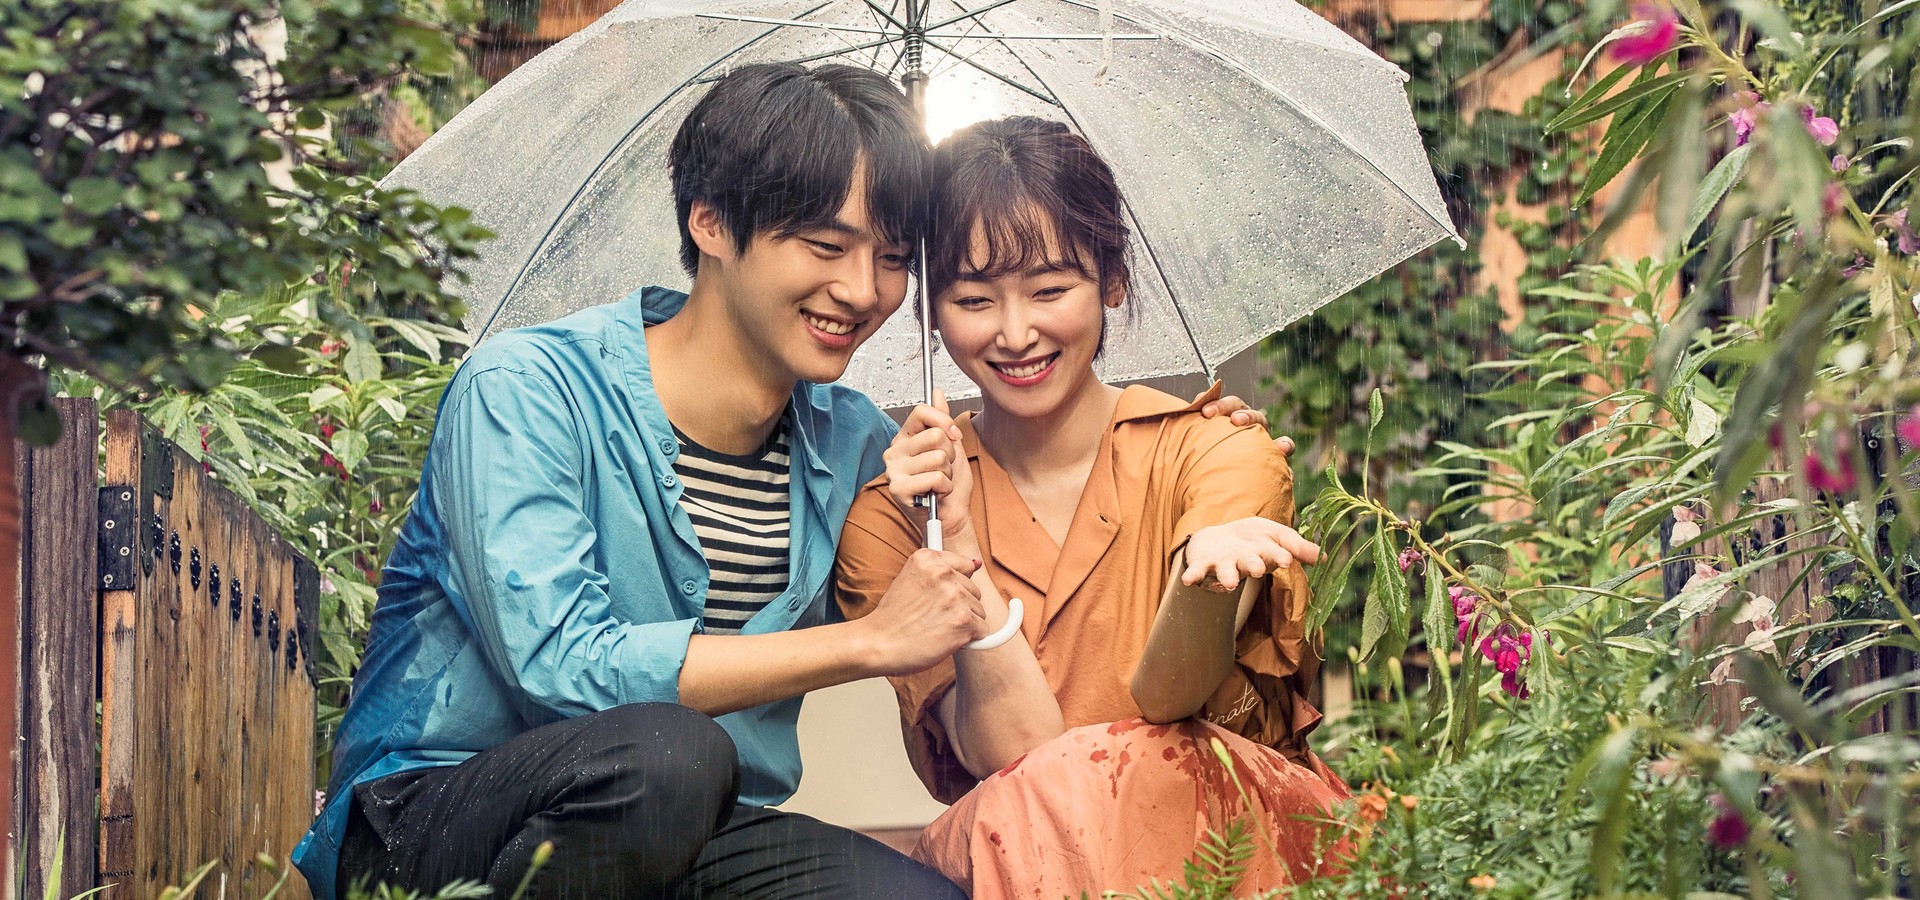 Temperature of Love - streaming tv show online